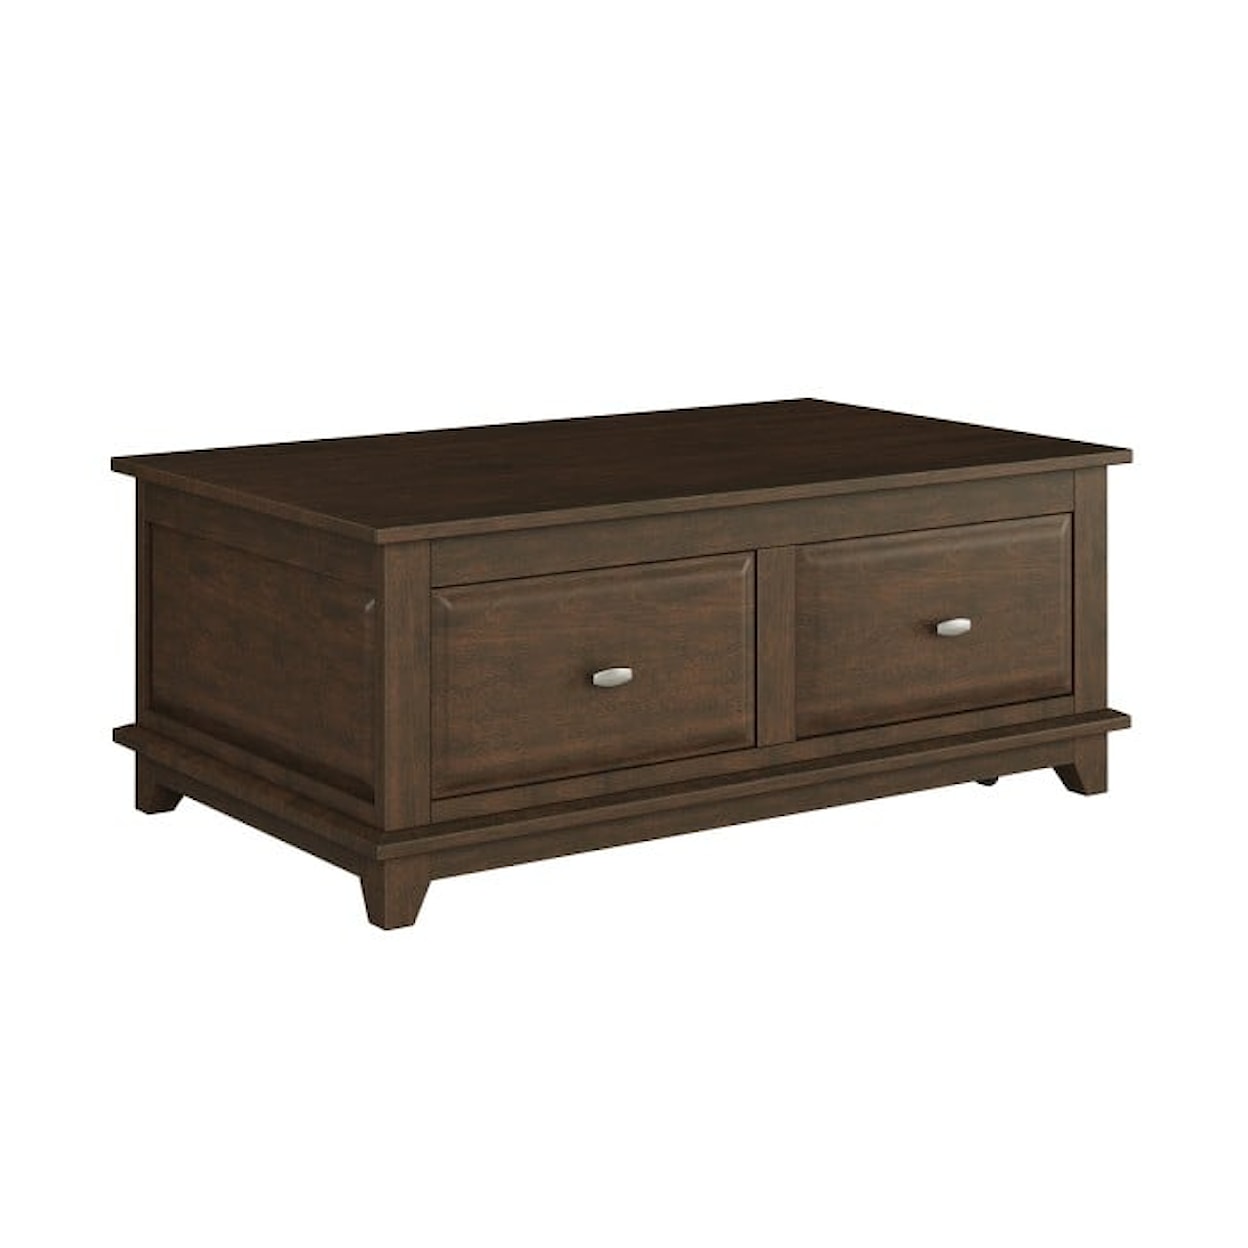 Homelegance Furniture Minot Lift Top Cocktail Table